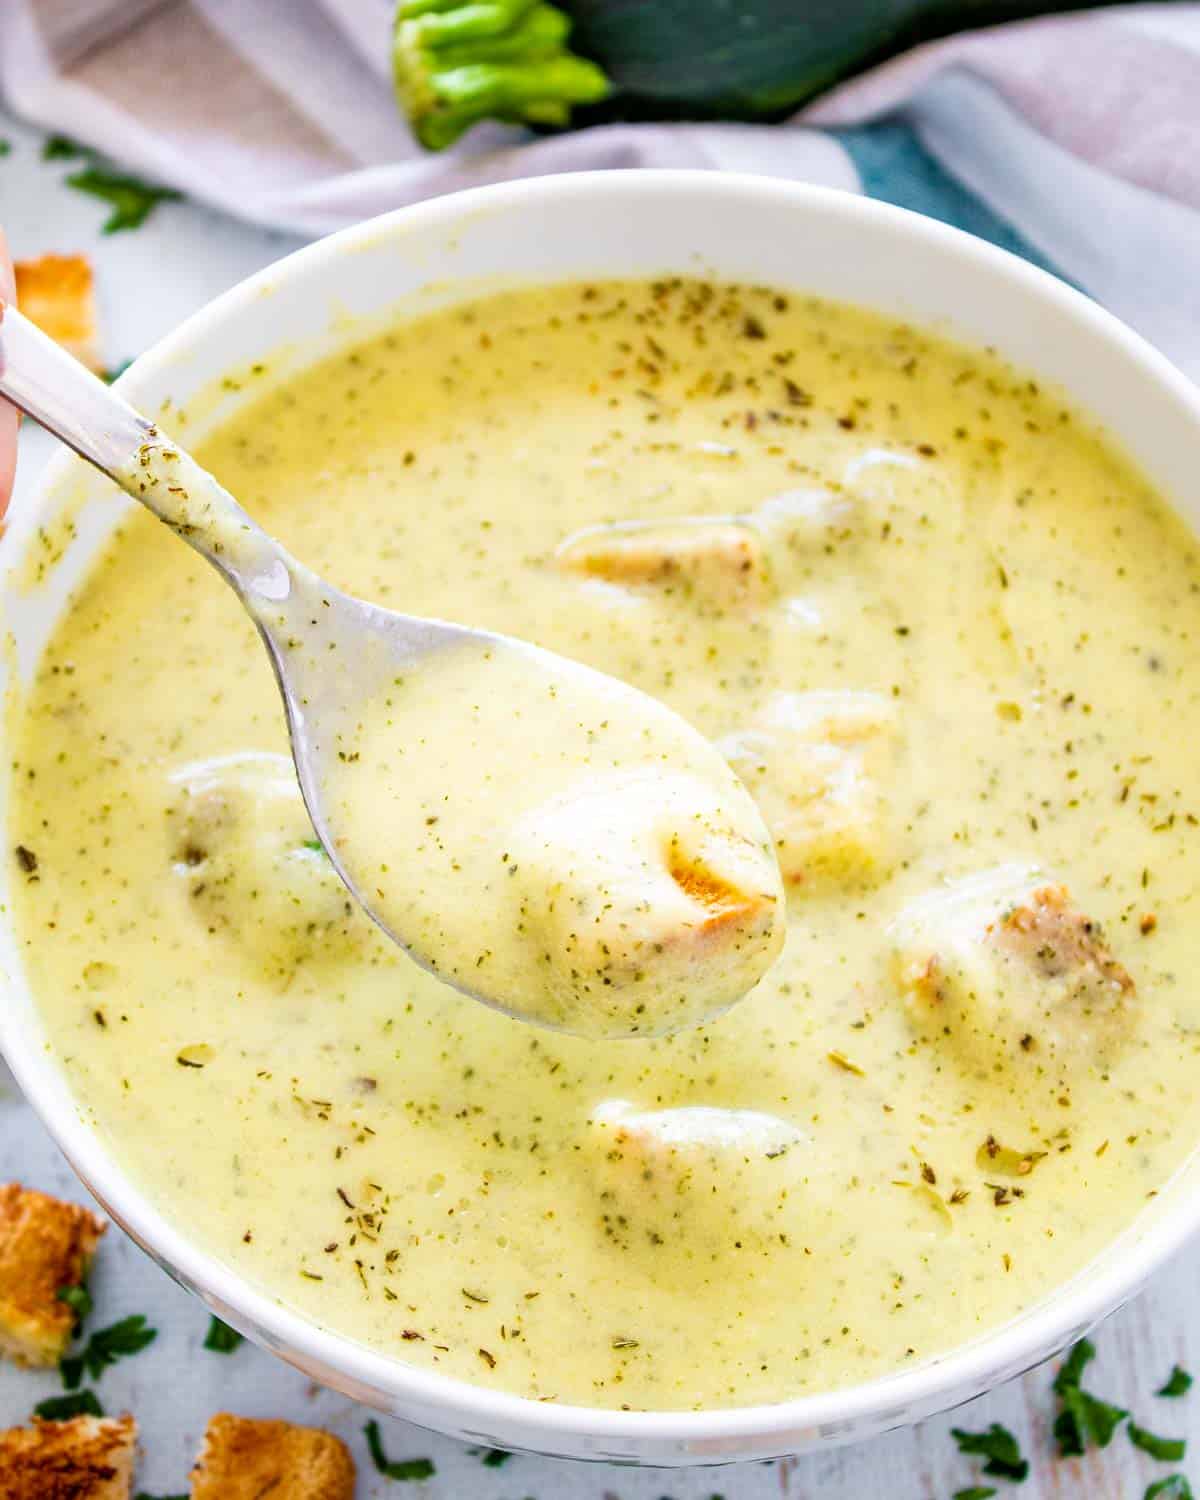 zucchini soup with croutons in a white bowl.